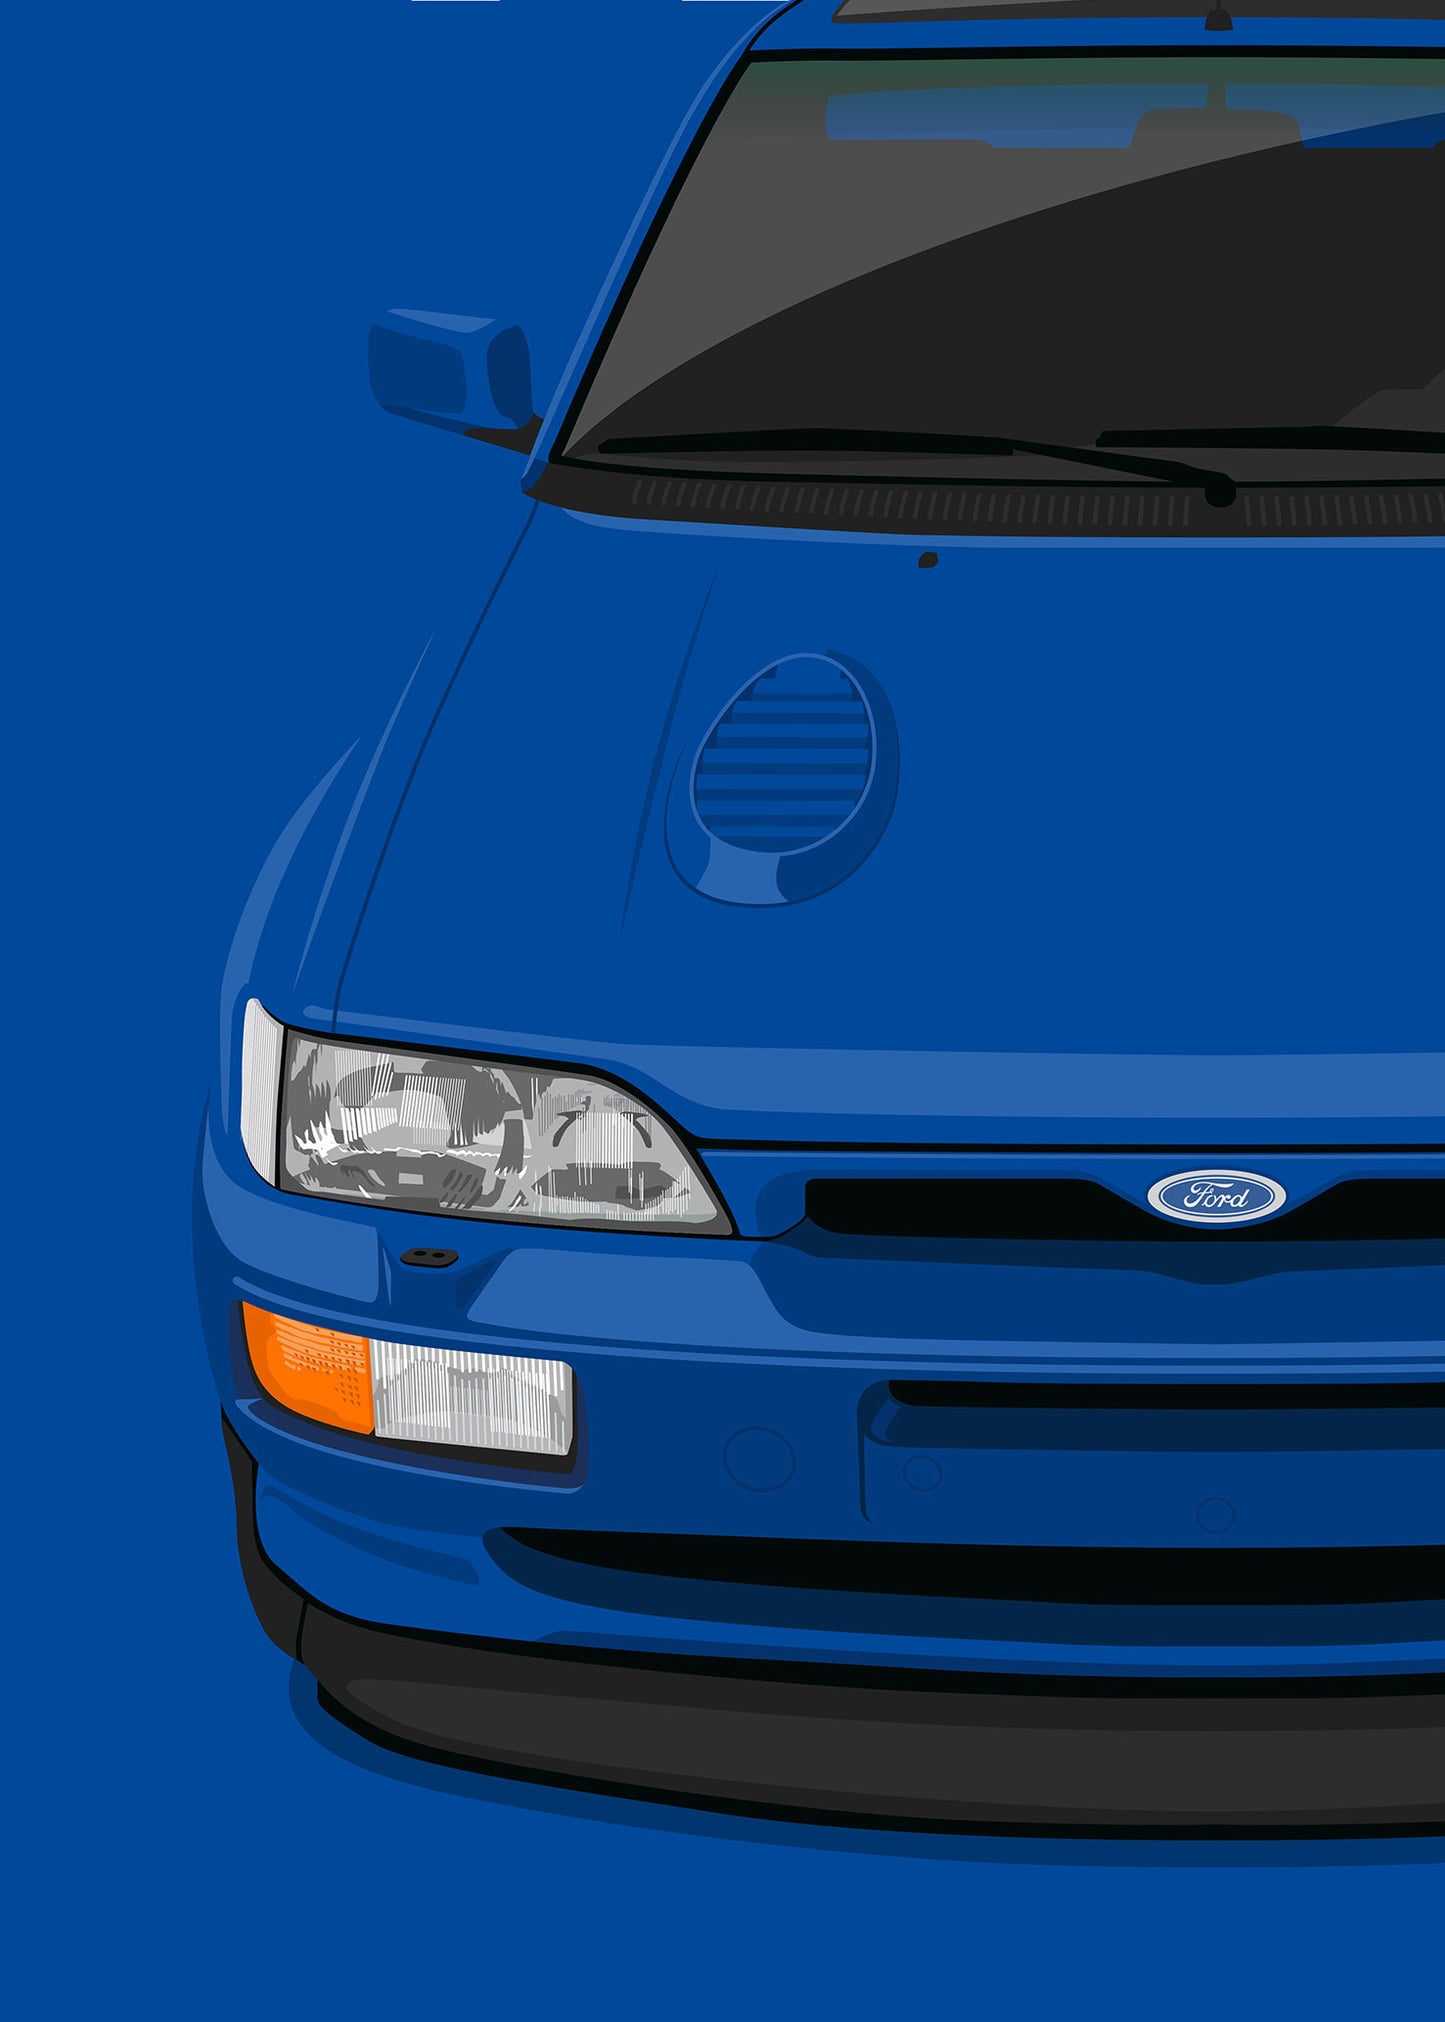 1992 Ford Escort RS Cosworth - Imperial Blue - poster print